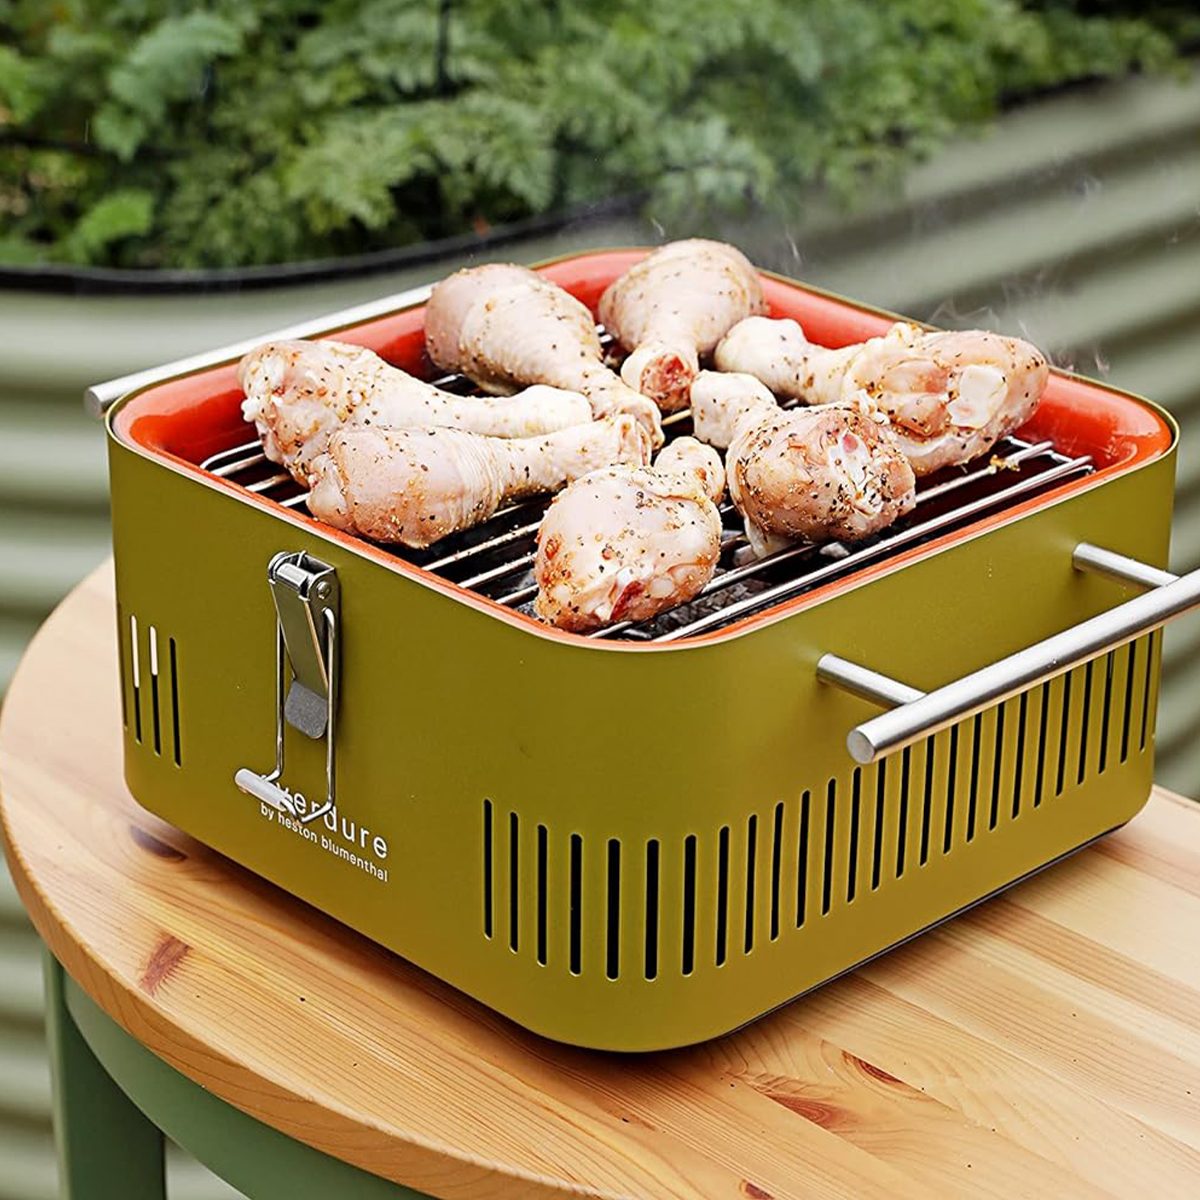 This Everdure Grill Is a Portable Grill, Prep Station and Food Storage Container All in One